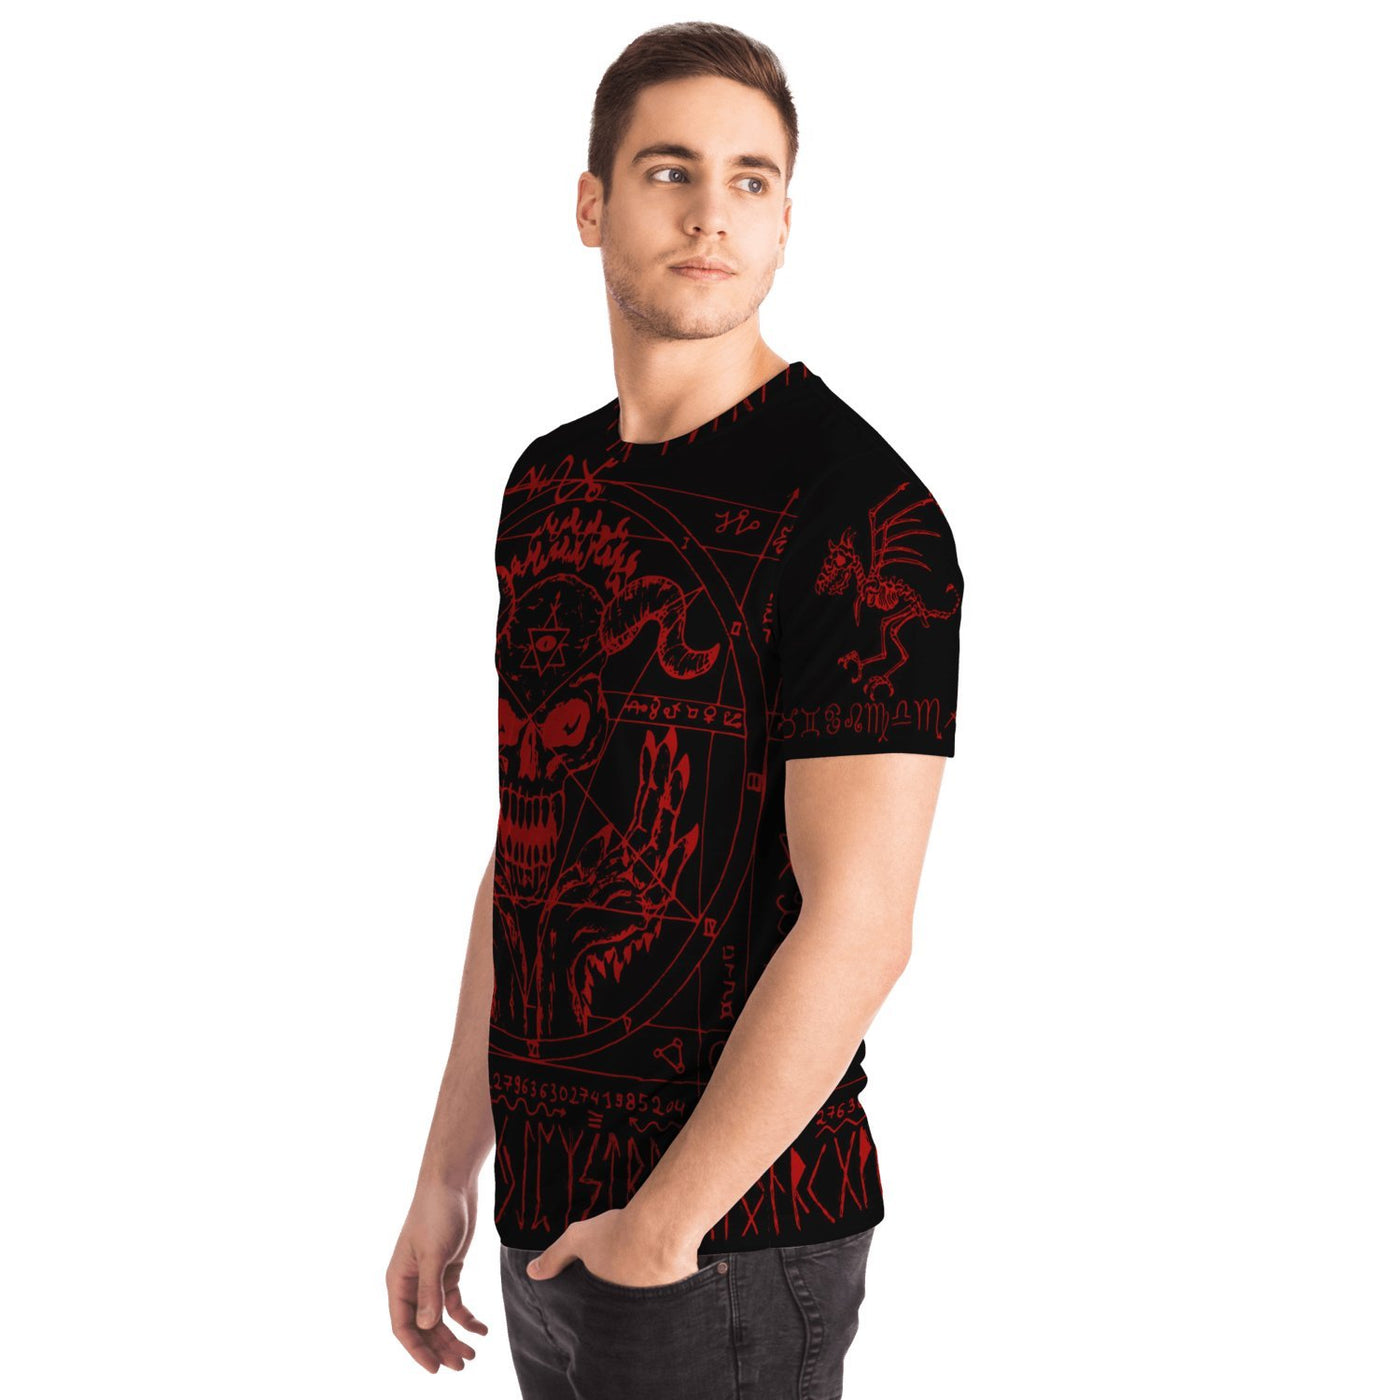 Tan Inked In Blood On Black | T-Shirt